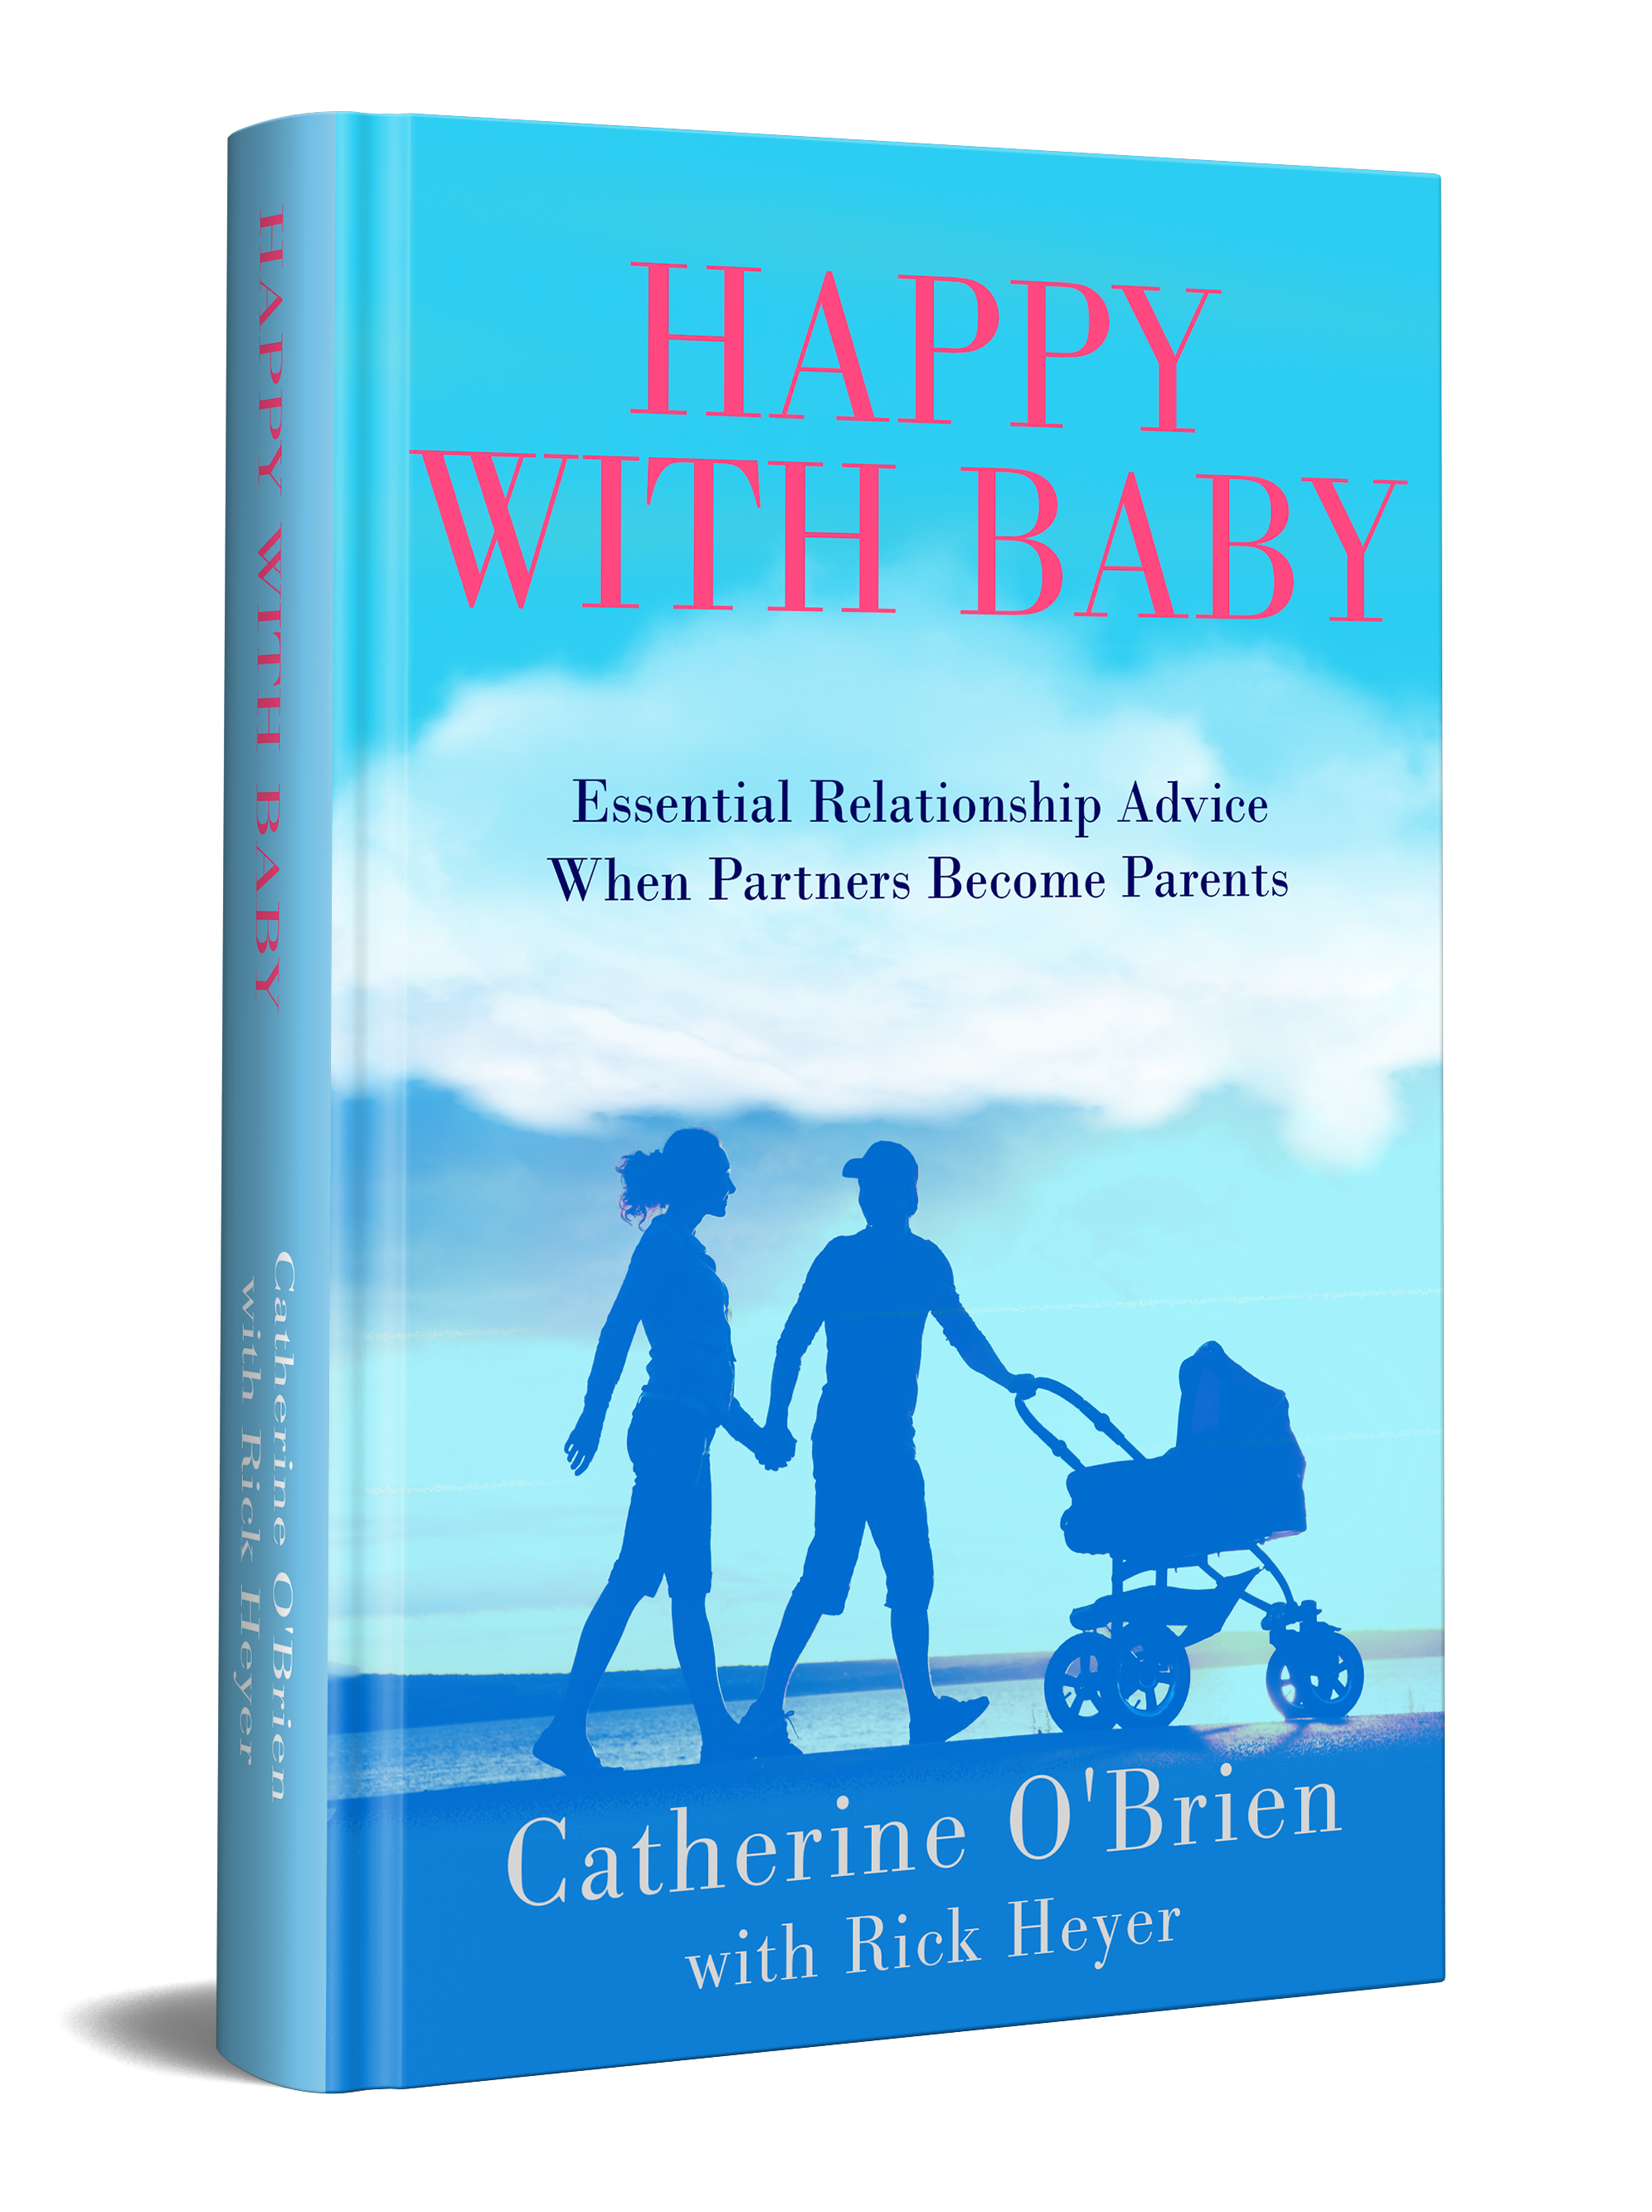 “This is a great book for new parents. I love that it’s full of real life examples of couples that the author has counseled. She offers great advice in an easy to read style.” - AMK - Amazon customer